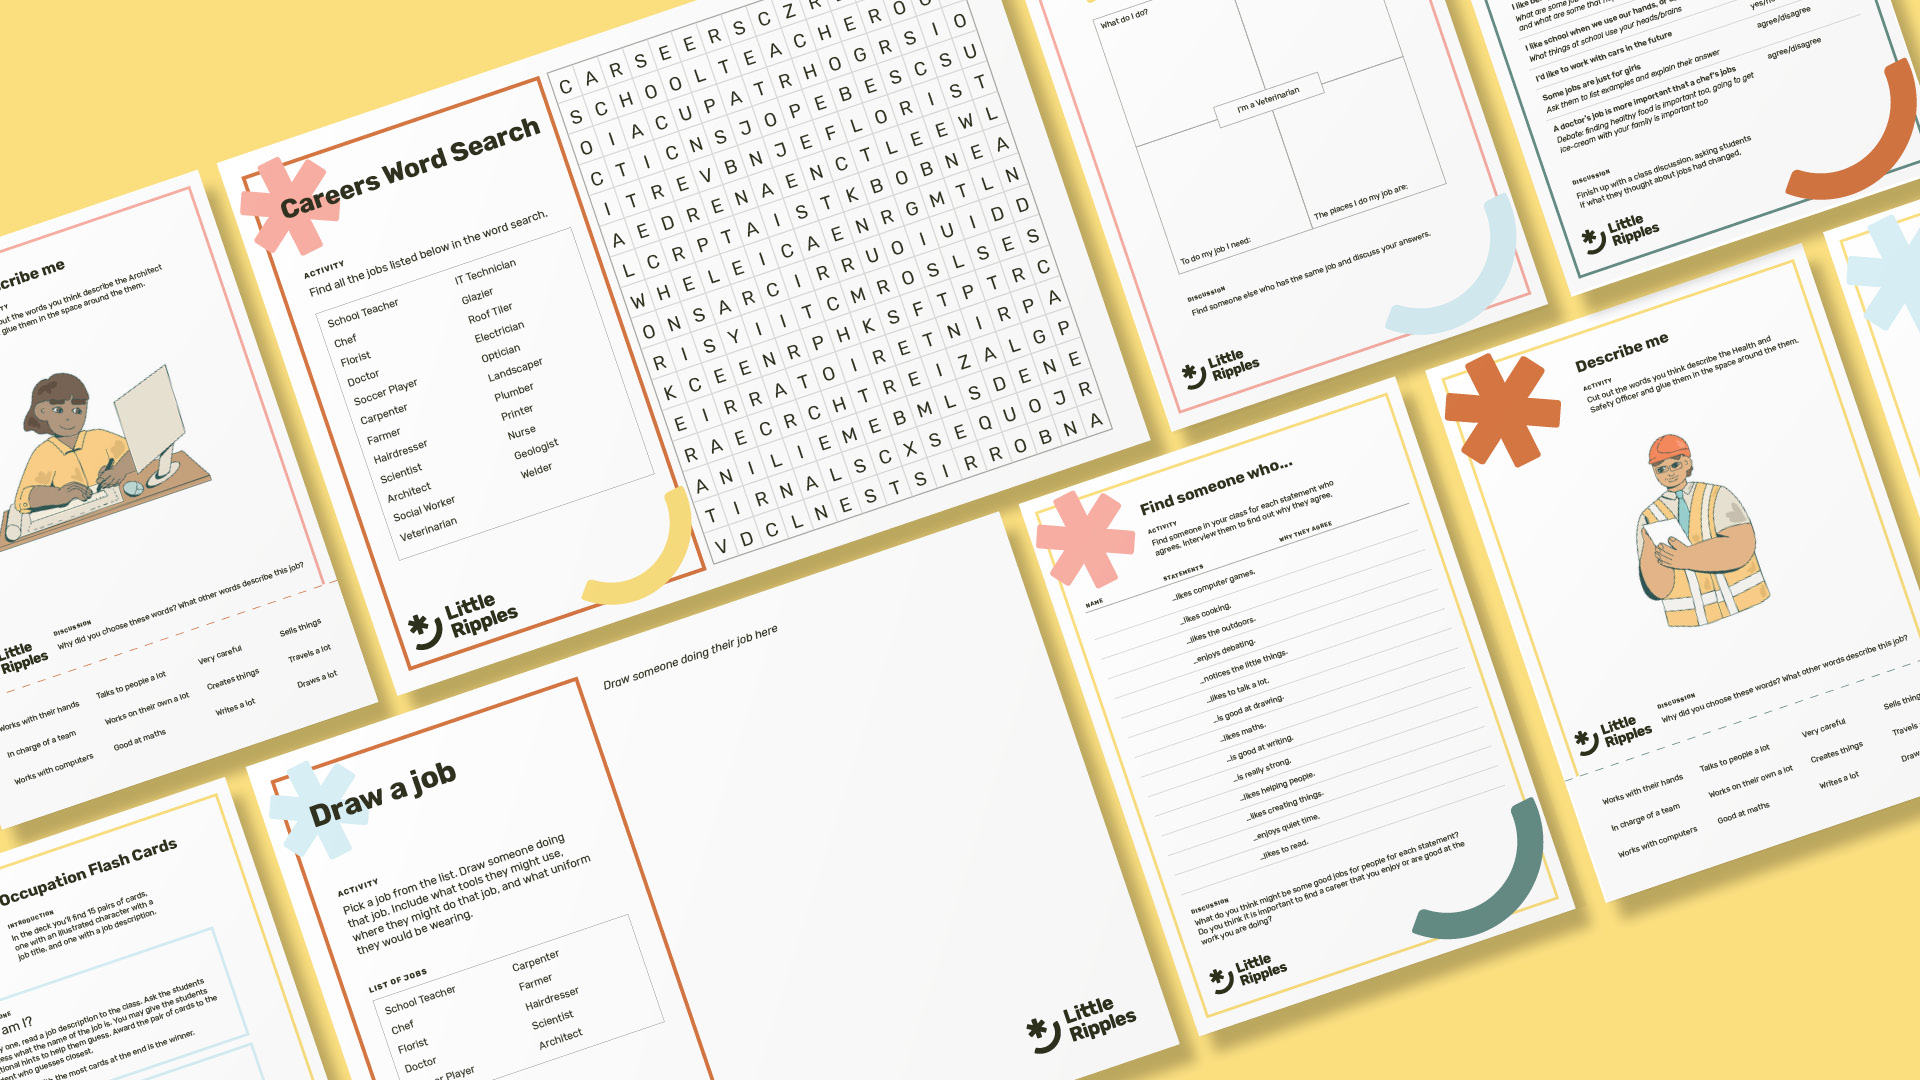 A series of 9 activity sheets on a yellow background including titles "Careers word search", "Draw a job", "Find someone who", "describe me"